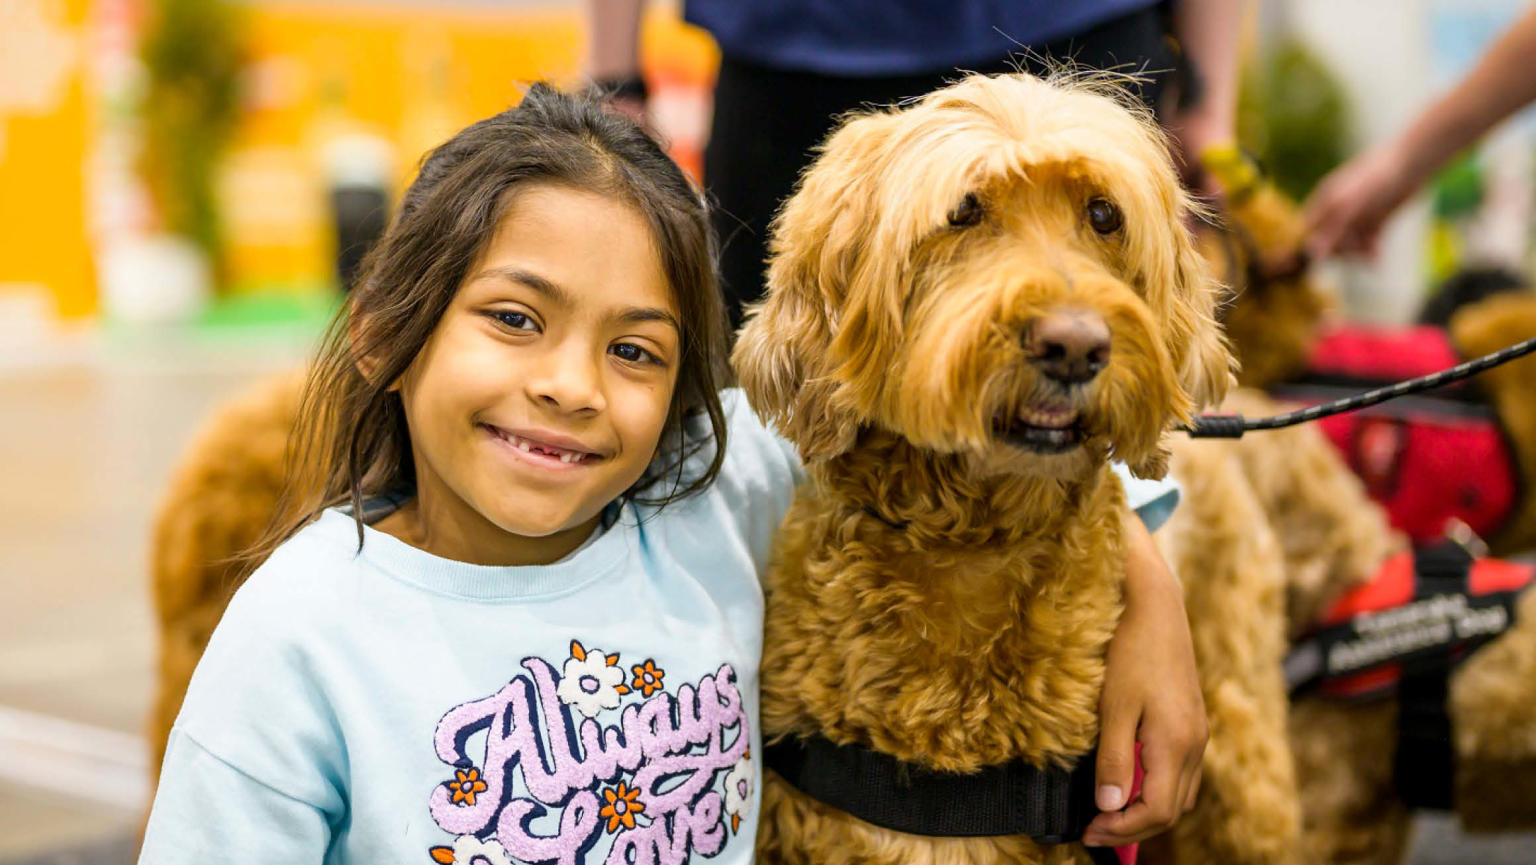 An image showing a young girl smiling with her arm around a brown dog. 